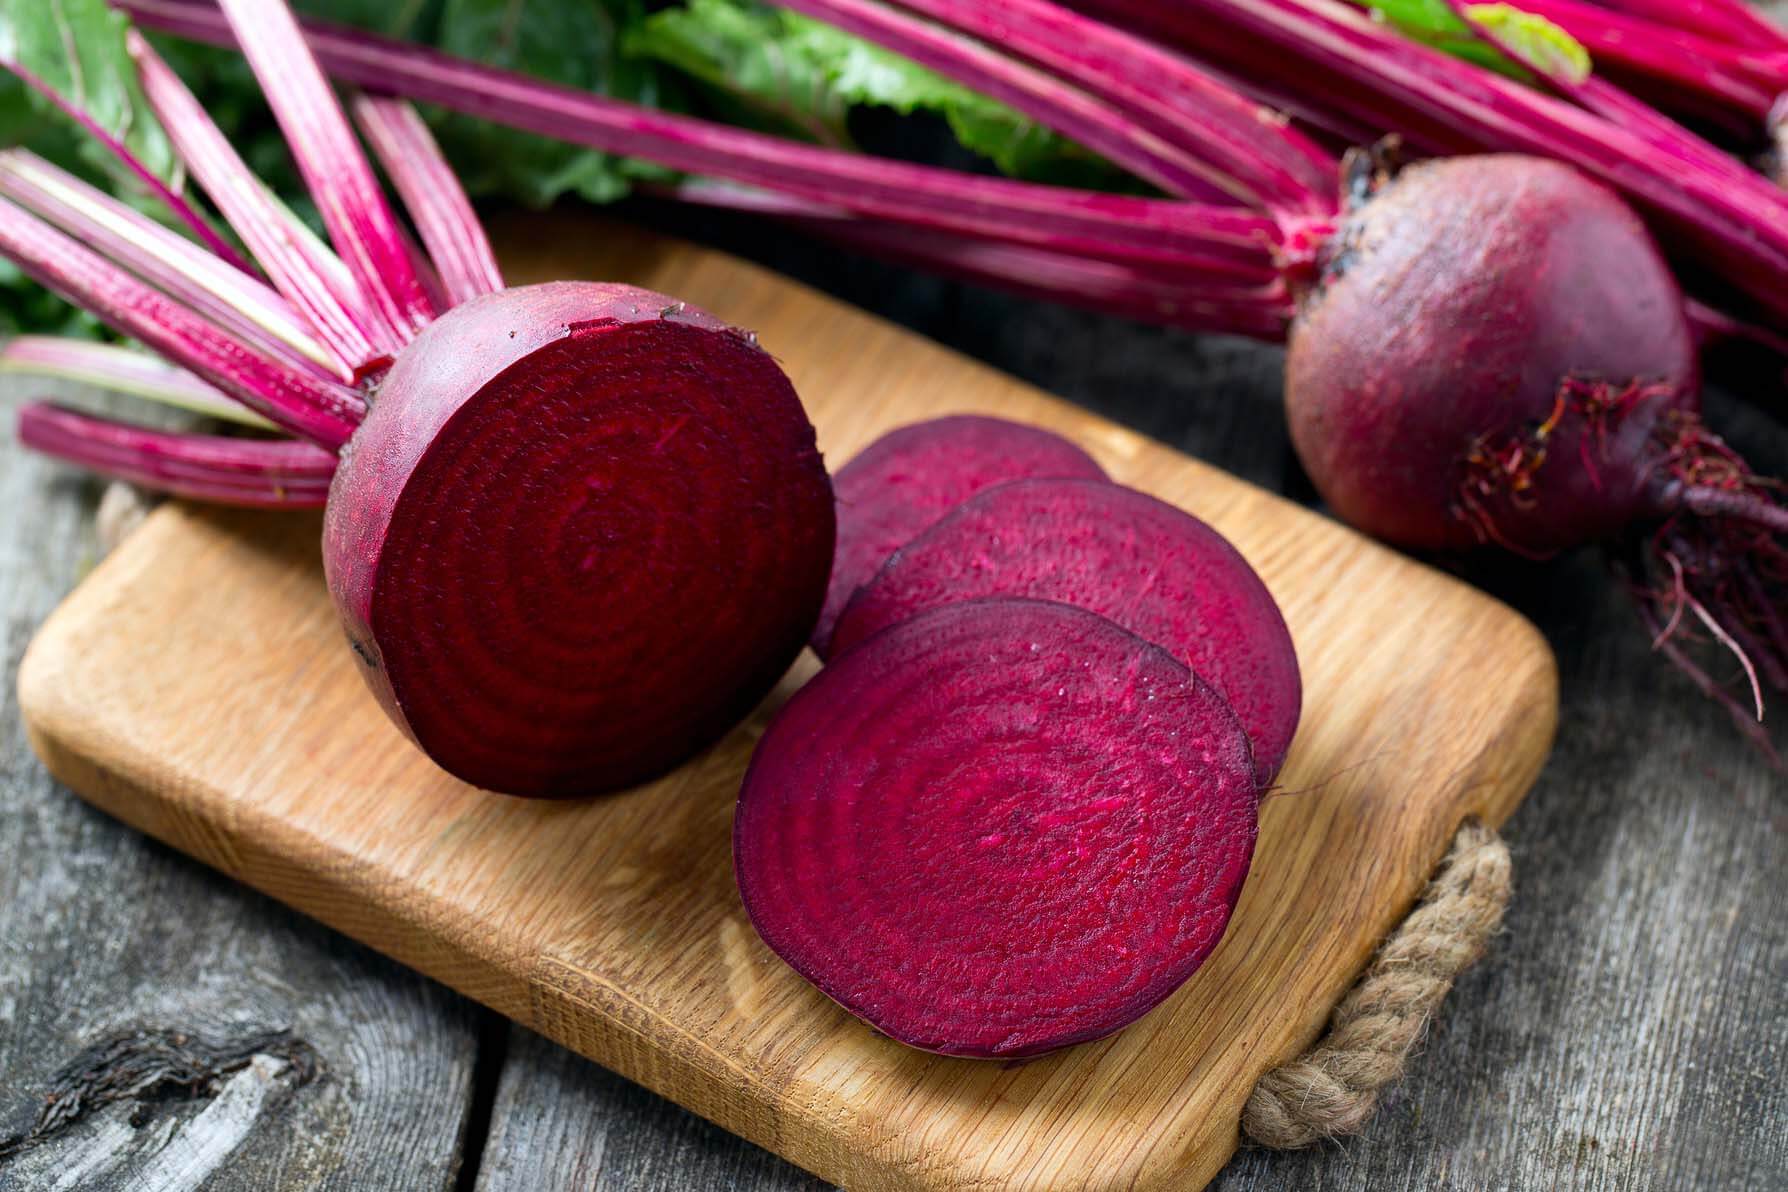 What are the benefits of beets?